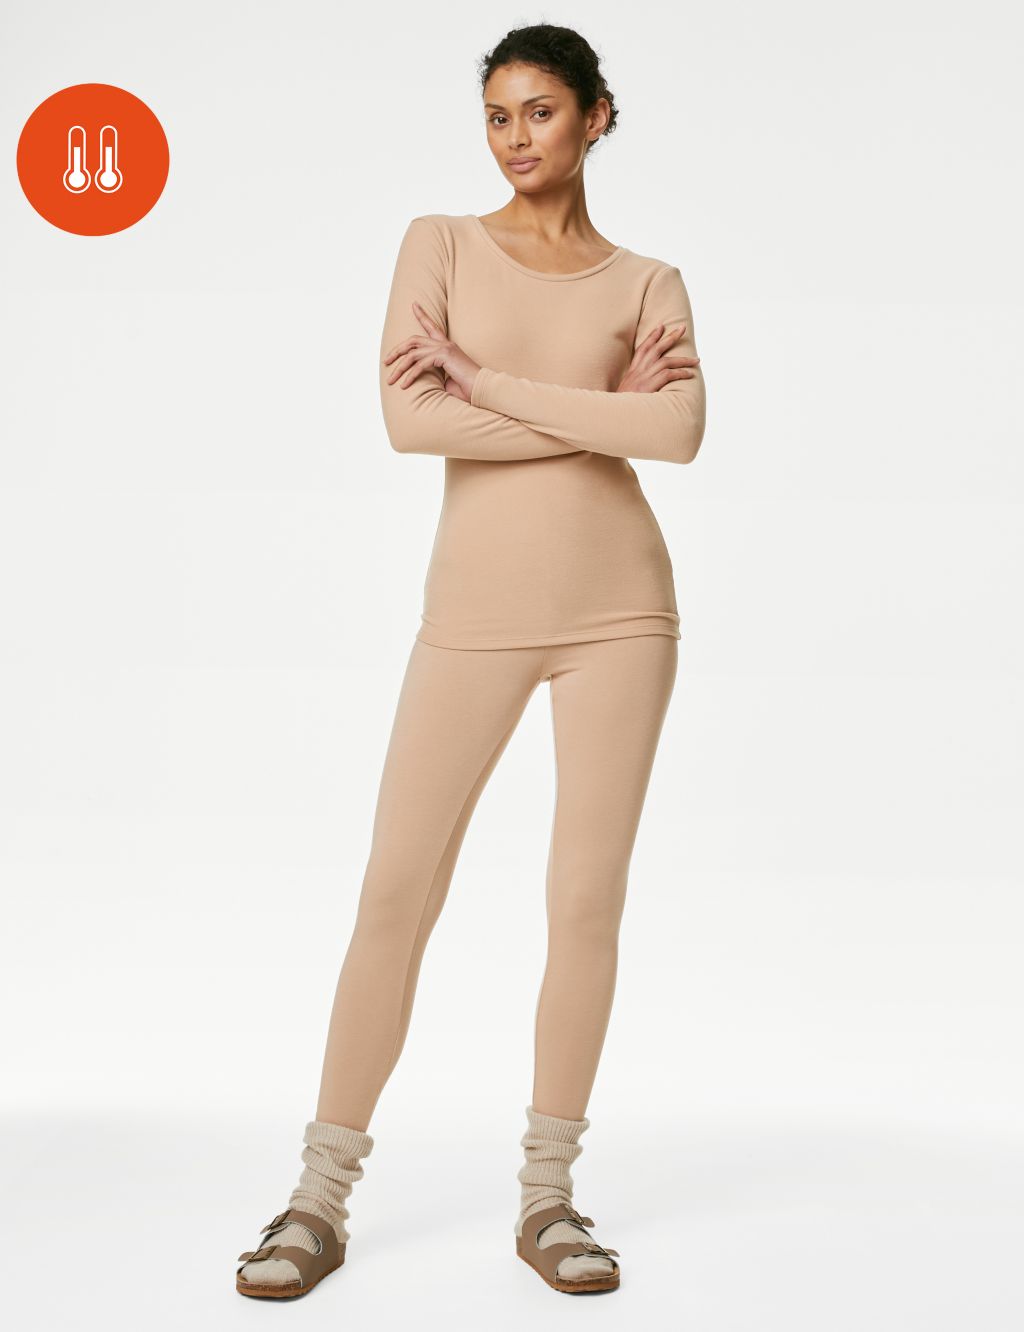 Women's Nude-Tone Thermals